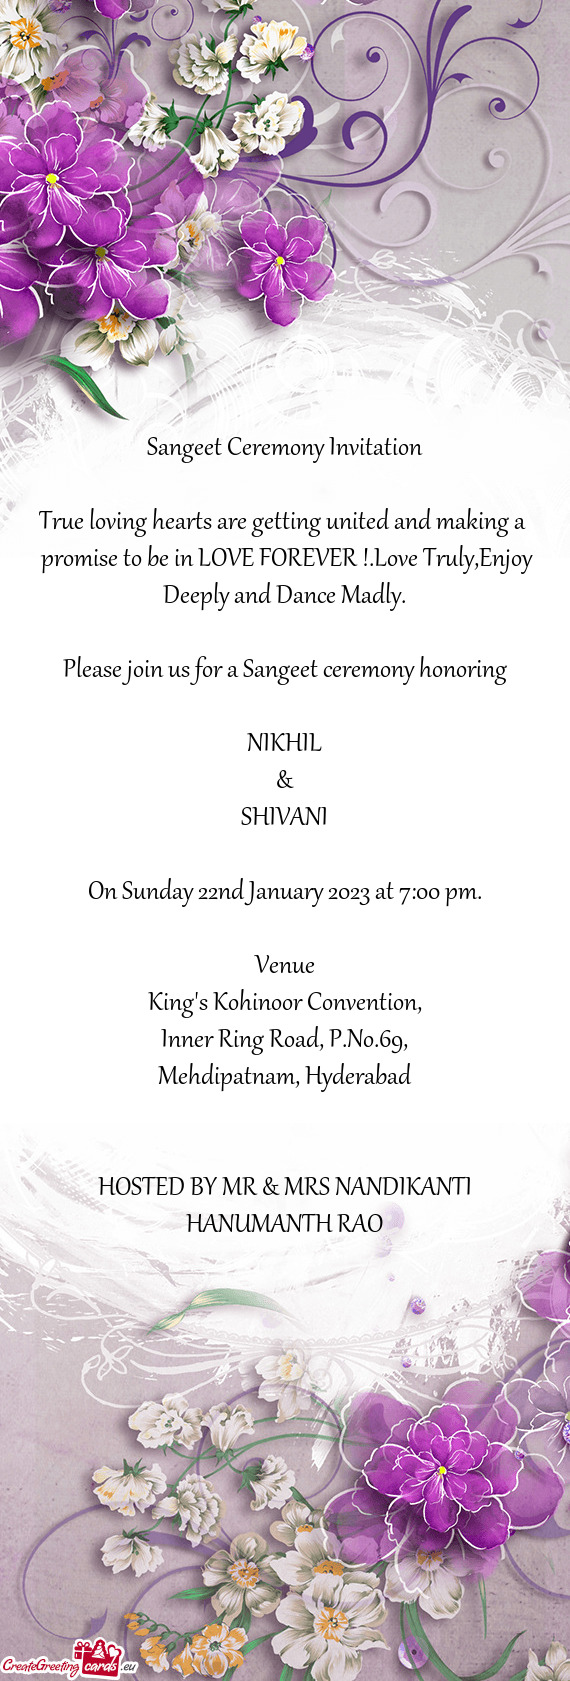 Please join us for a Sangeet ceremony honoring